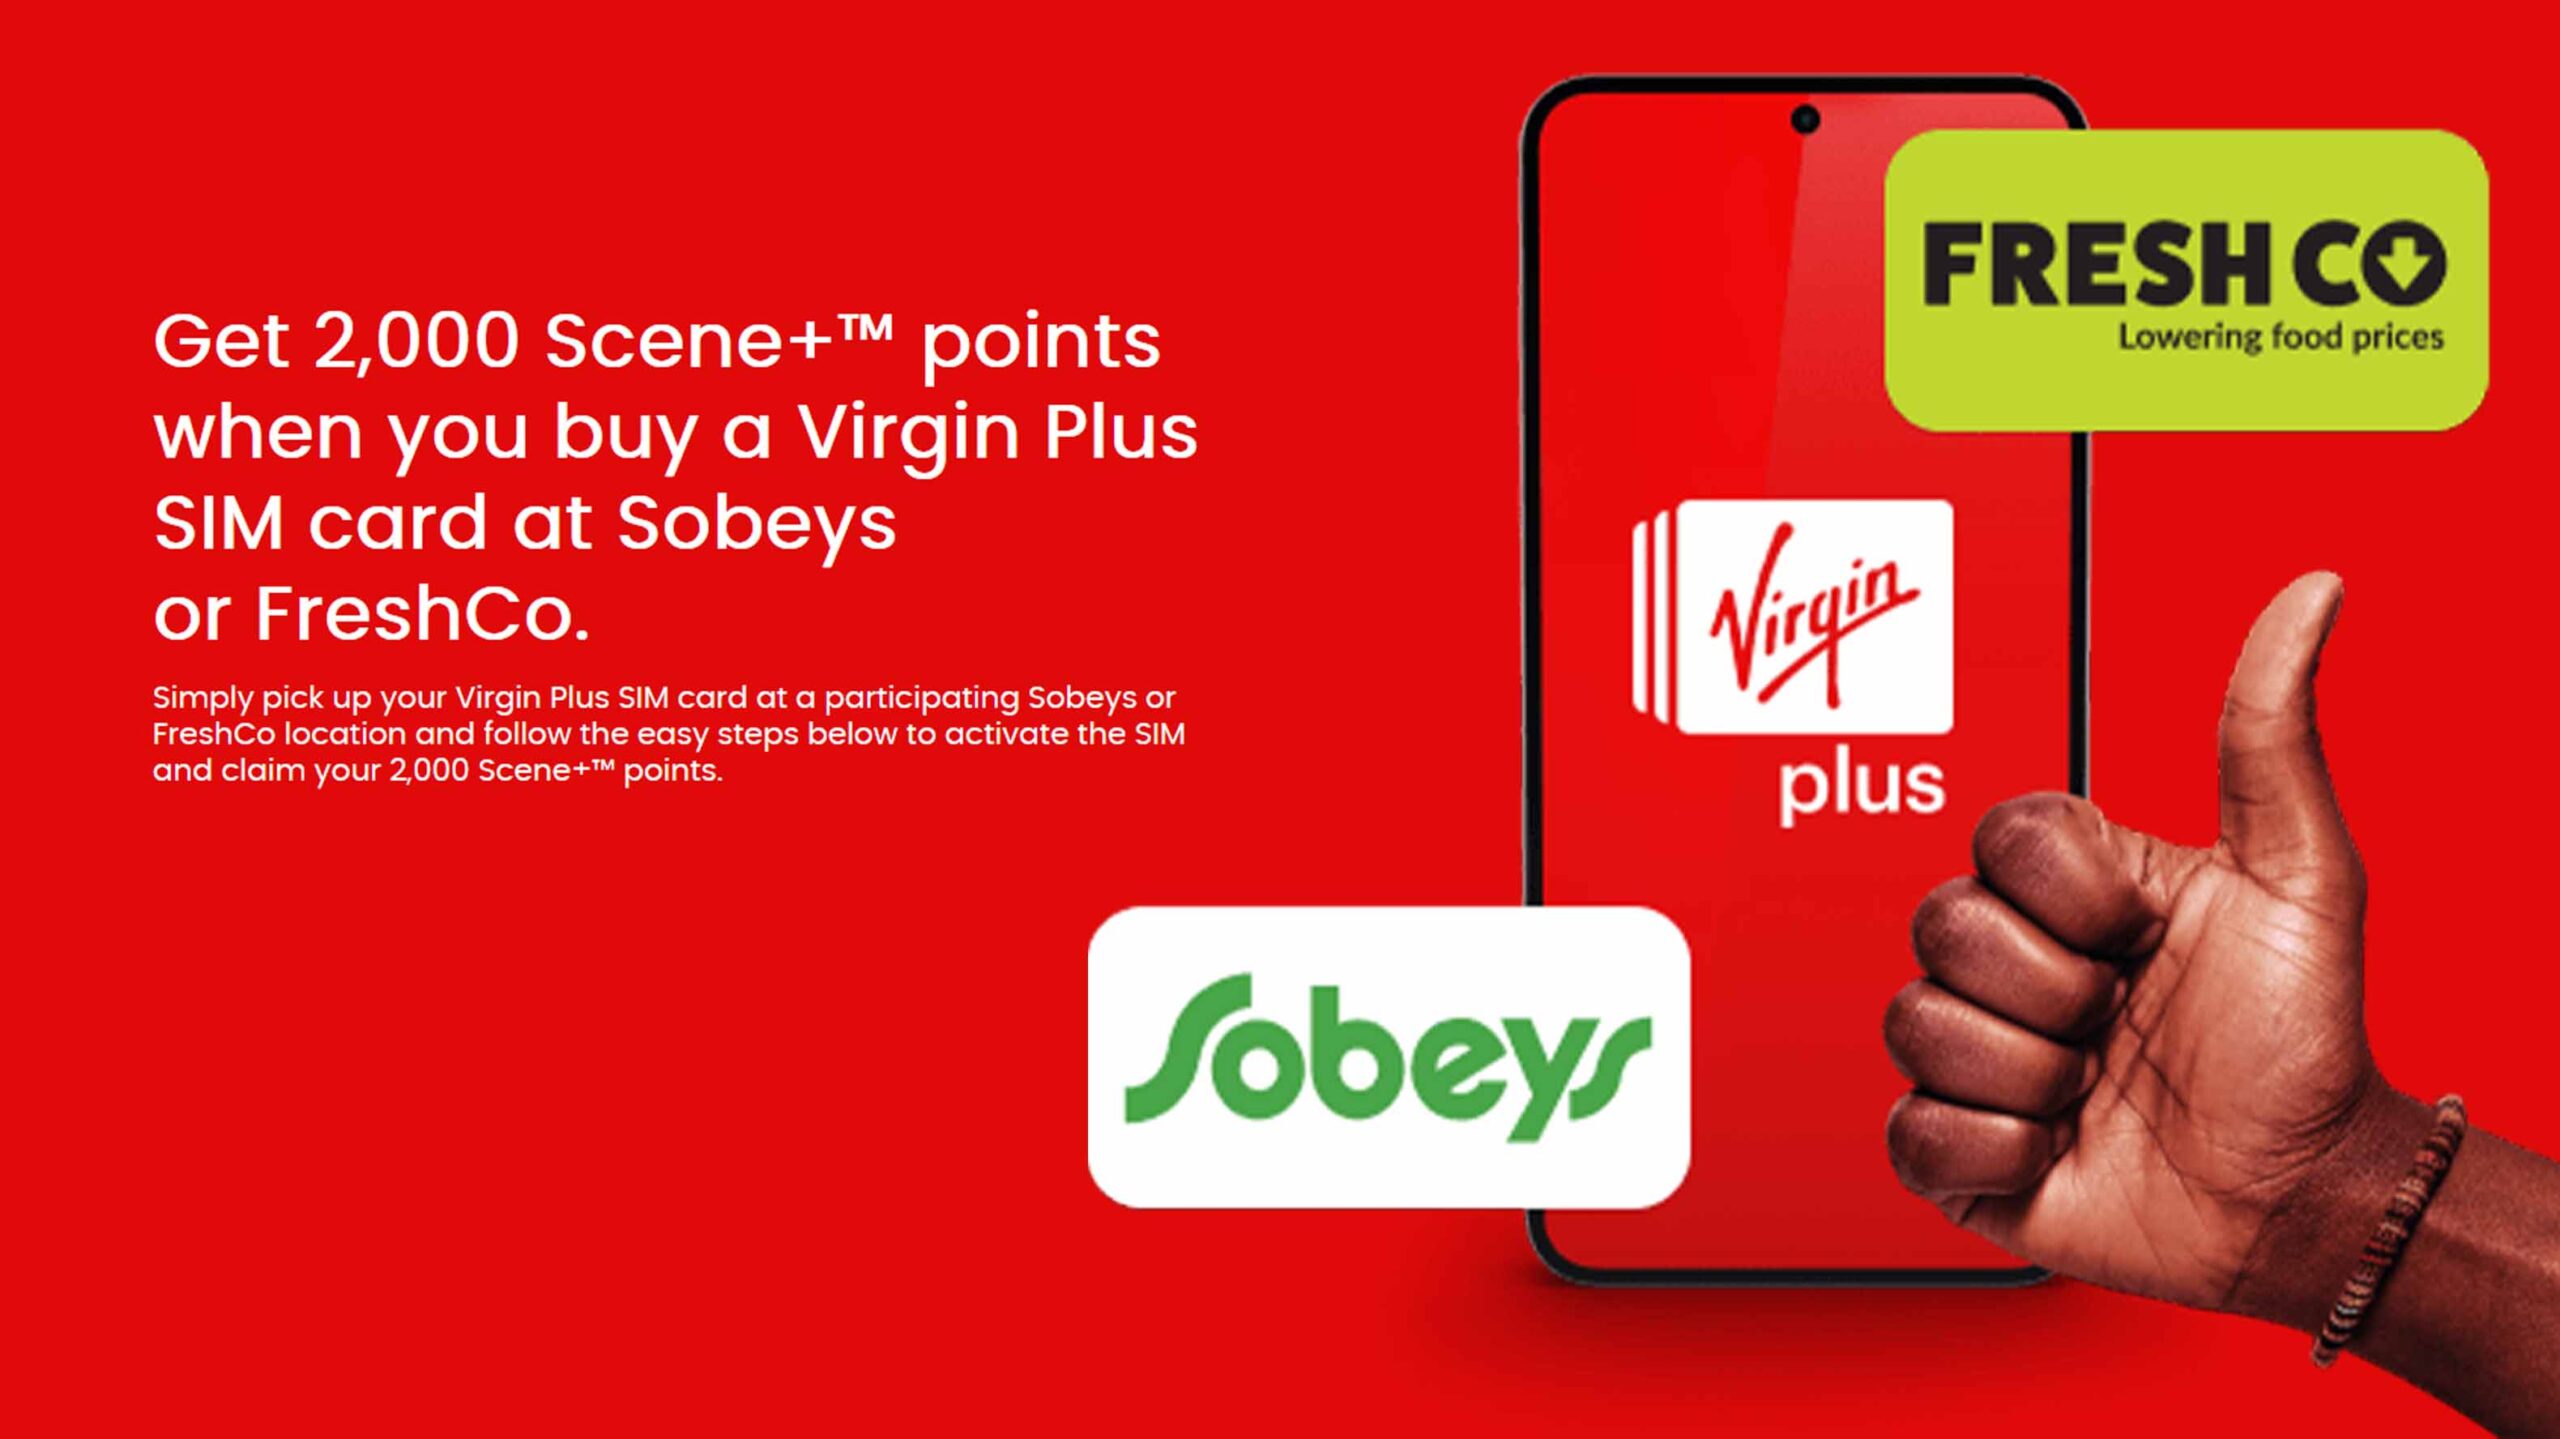 Bell brings Virgin, Lucky prepaid plans to Sobeys and FreshCo